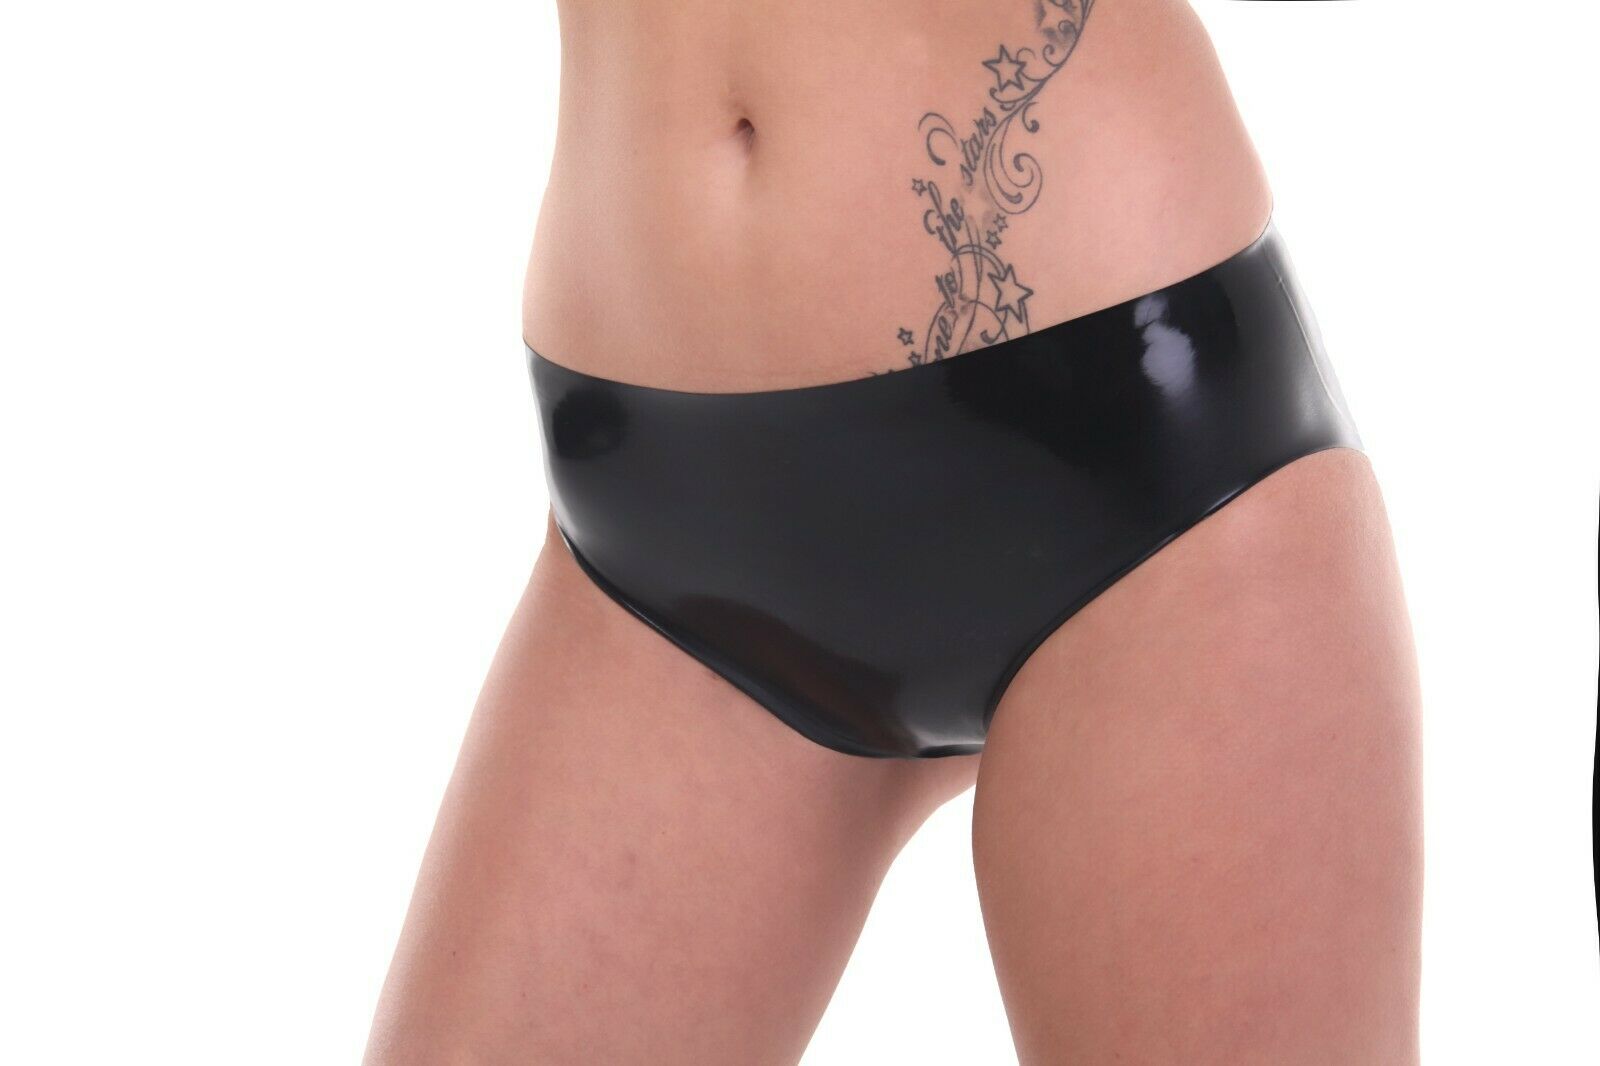 Exclusive Super sexy LATEX Wetlook Women Brief BLACK or RED Made in UK (DB-100)